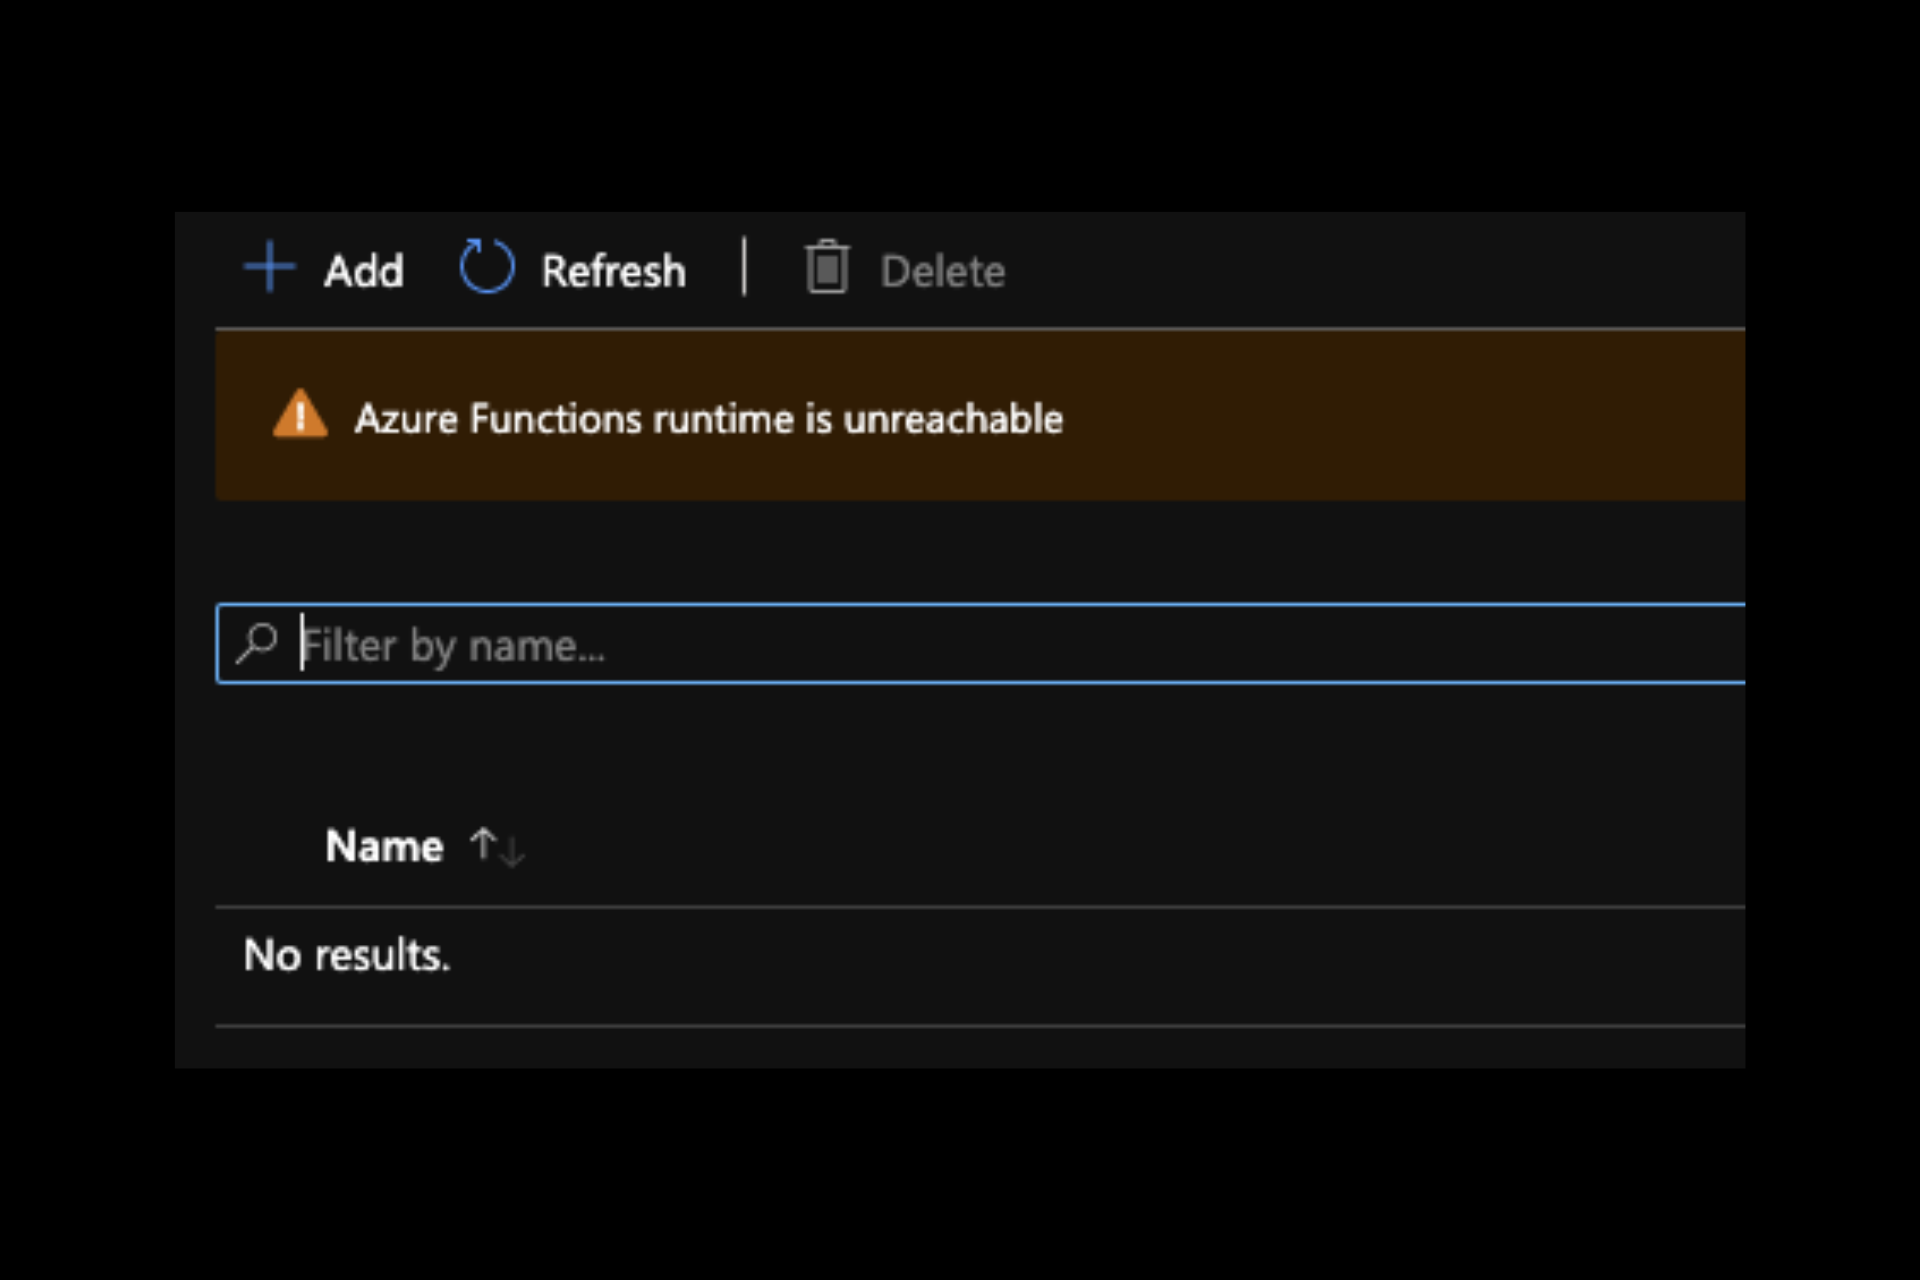 azure functions runtime is unreachable